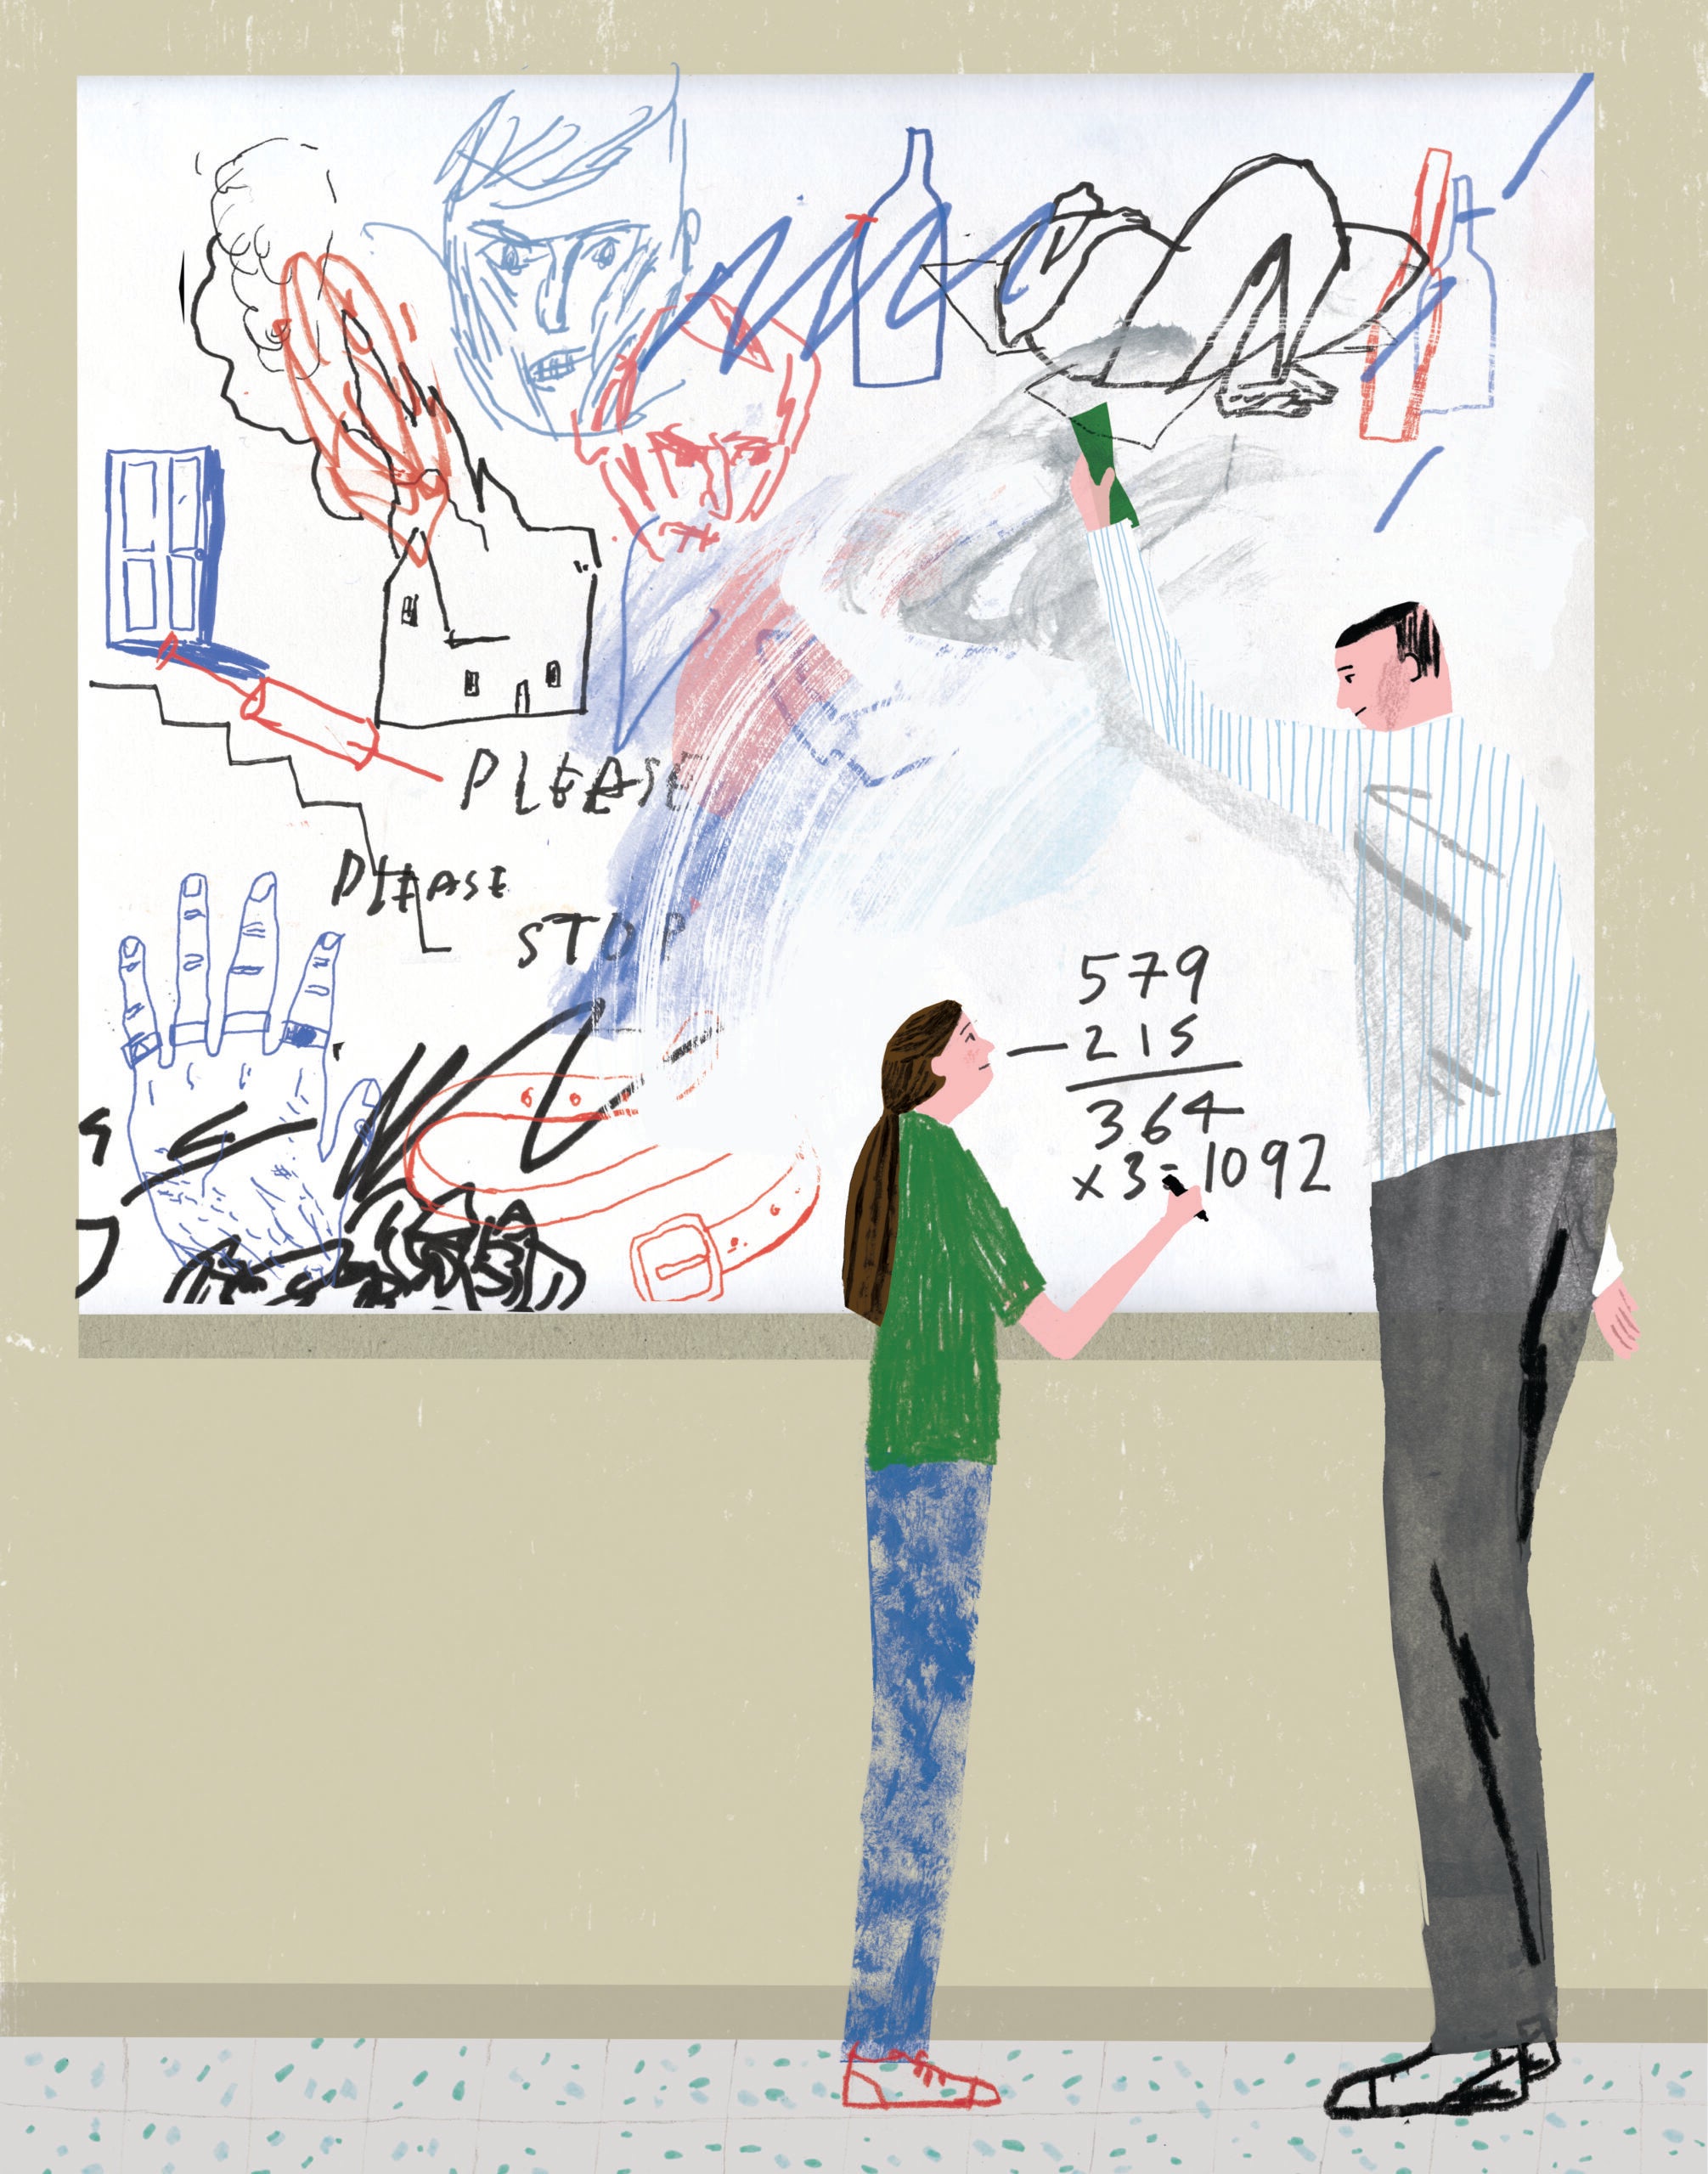 Illustration of an adult and a child at a whiteboard covered with drawings and text